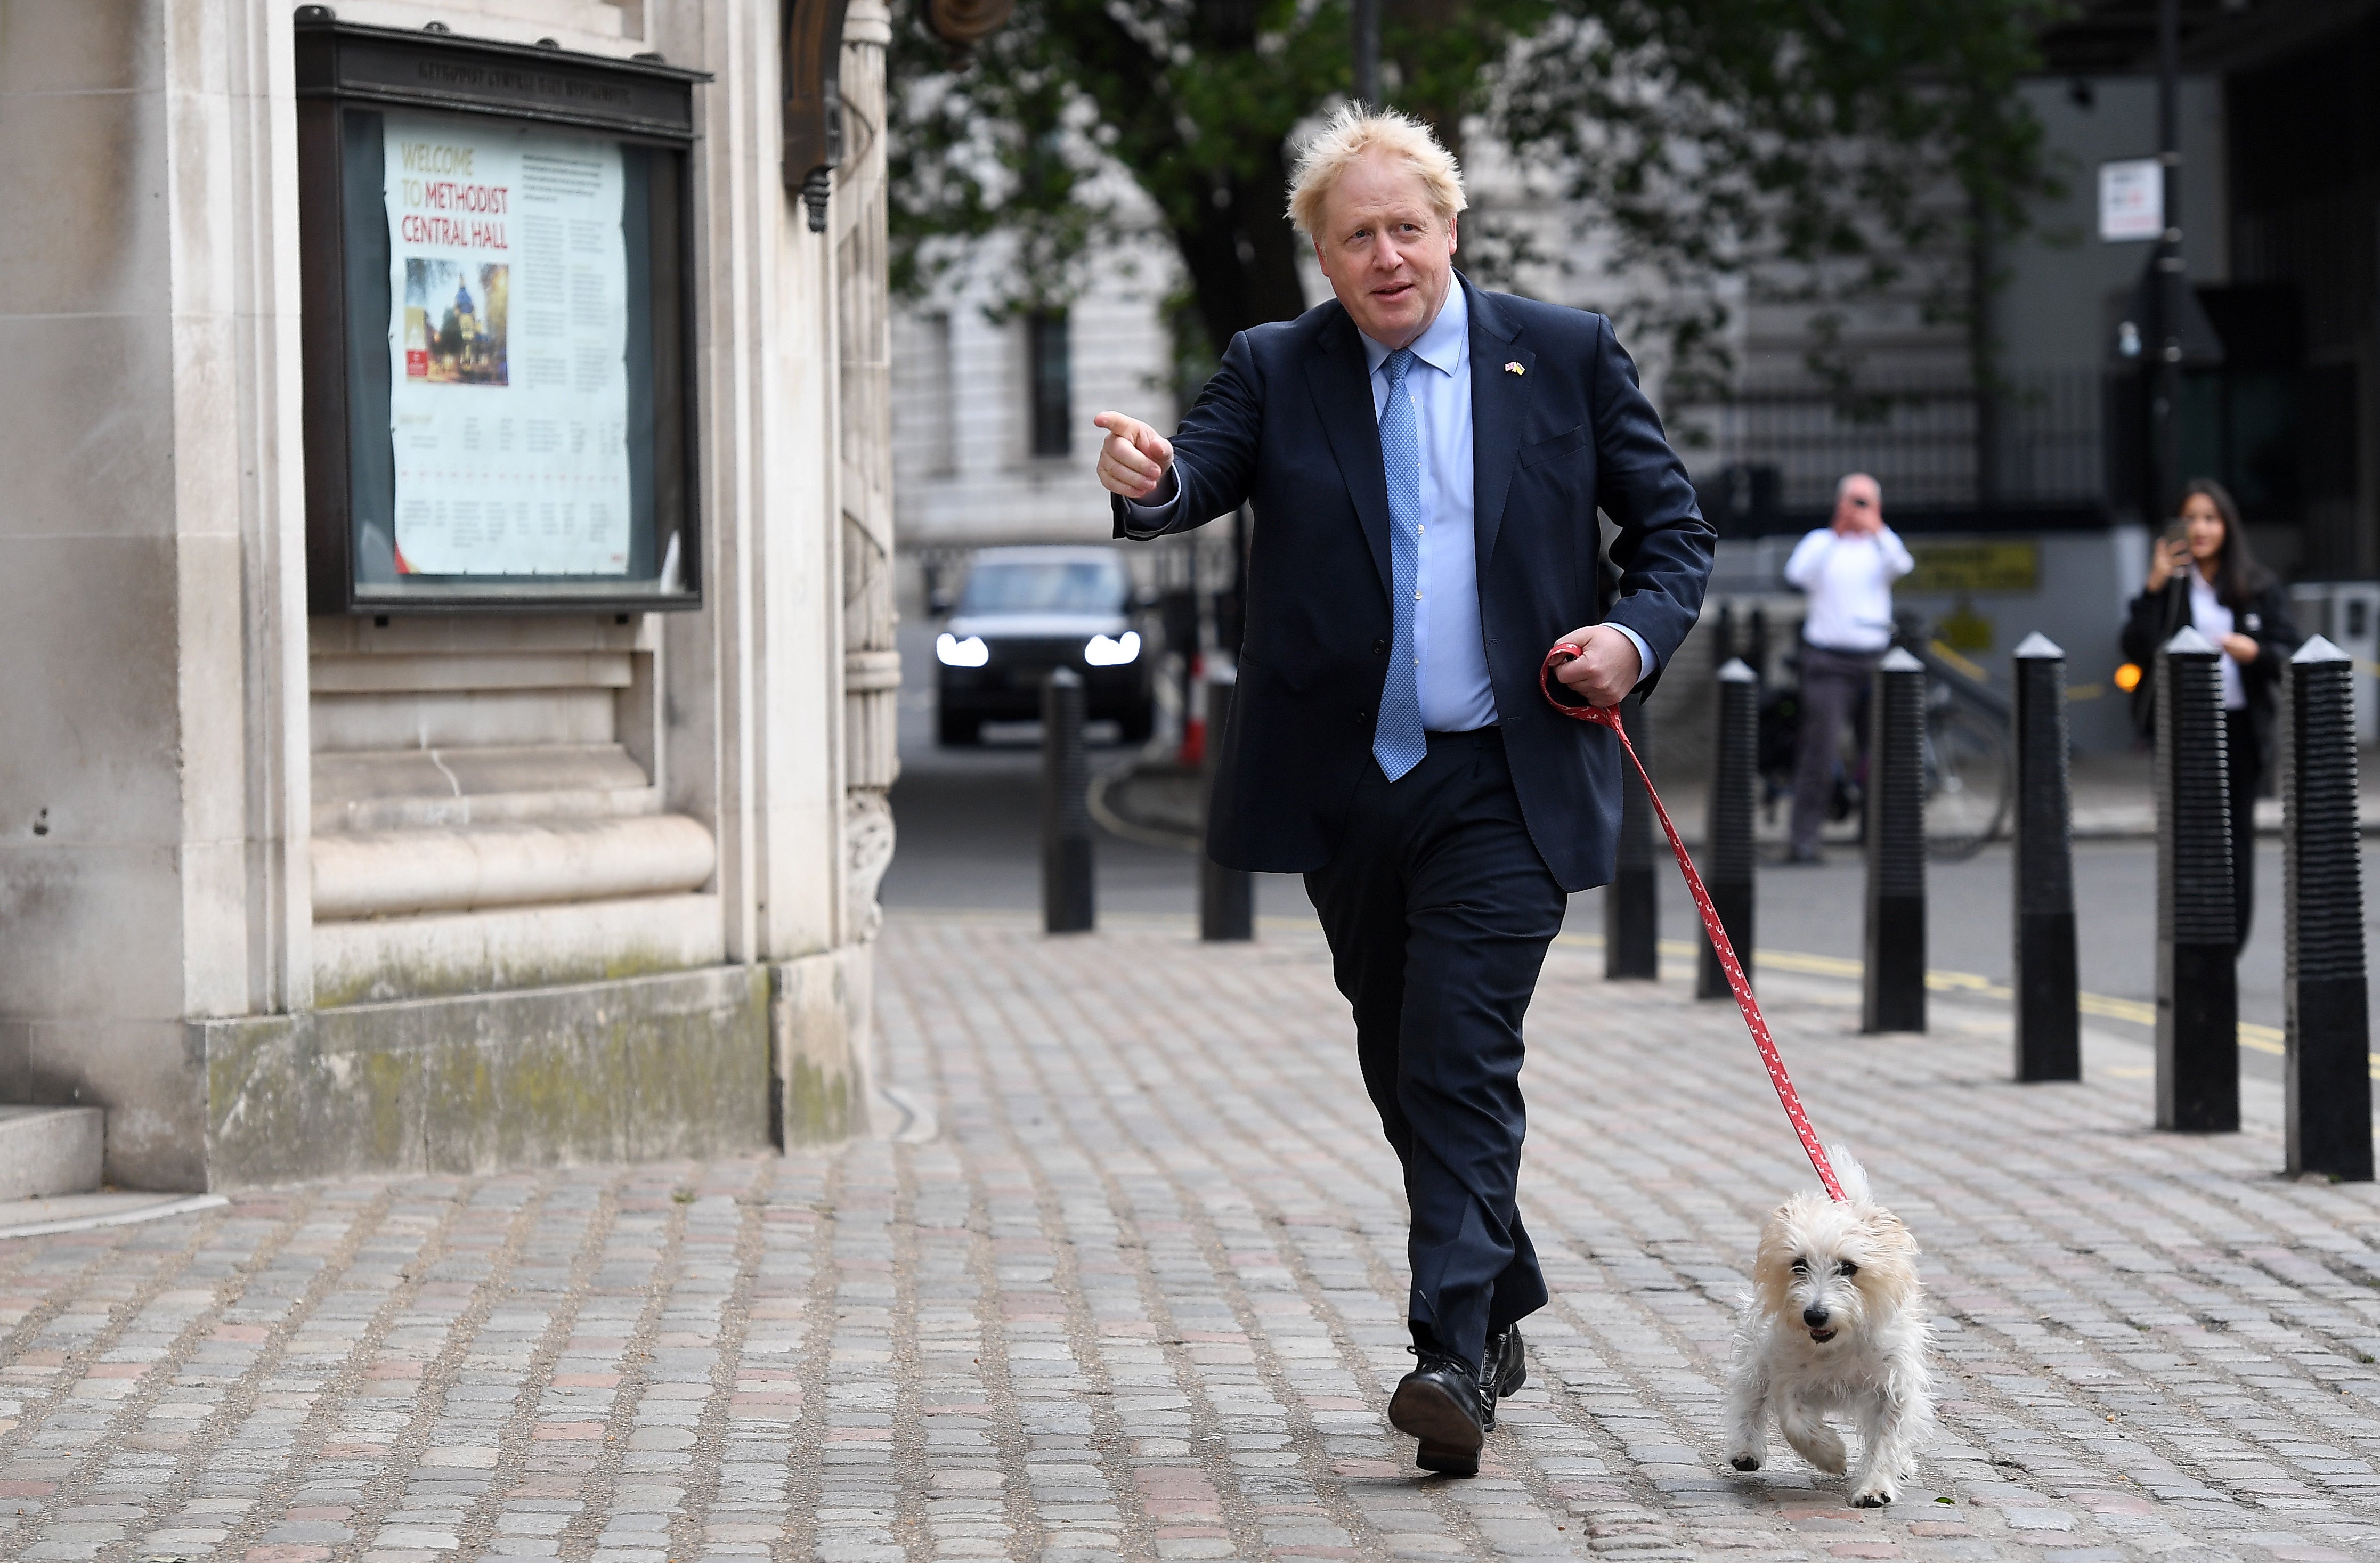 Prime minister Boris Johnson arrives at a polling station in Westminster